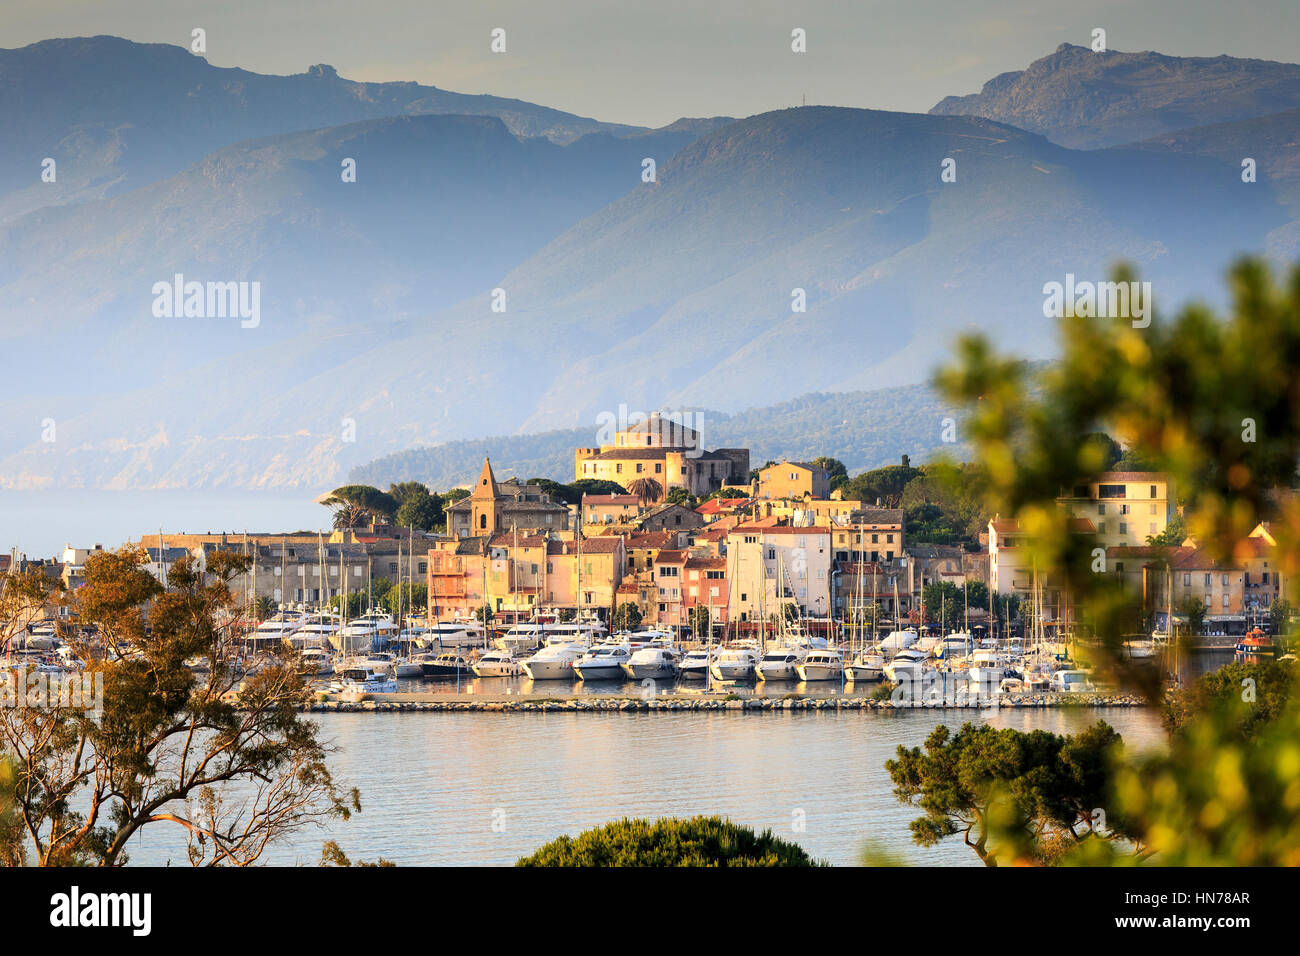 View of St Florent, Corsica, France Stock Photo